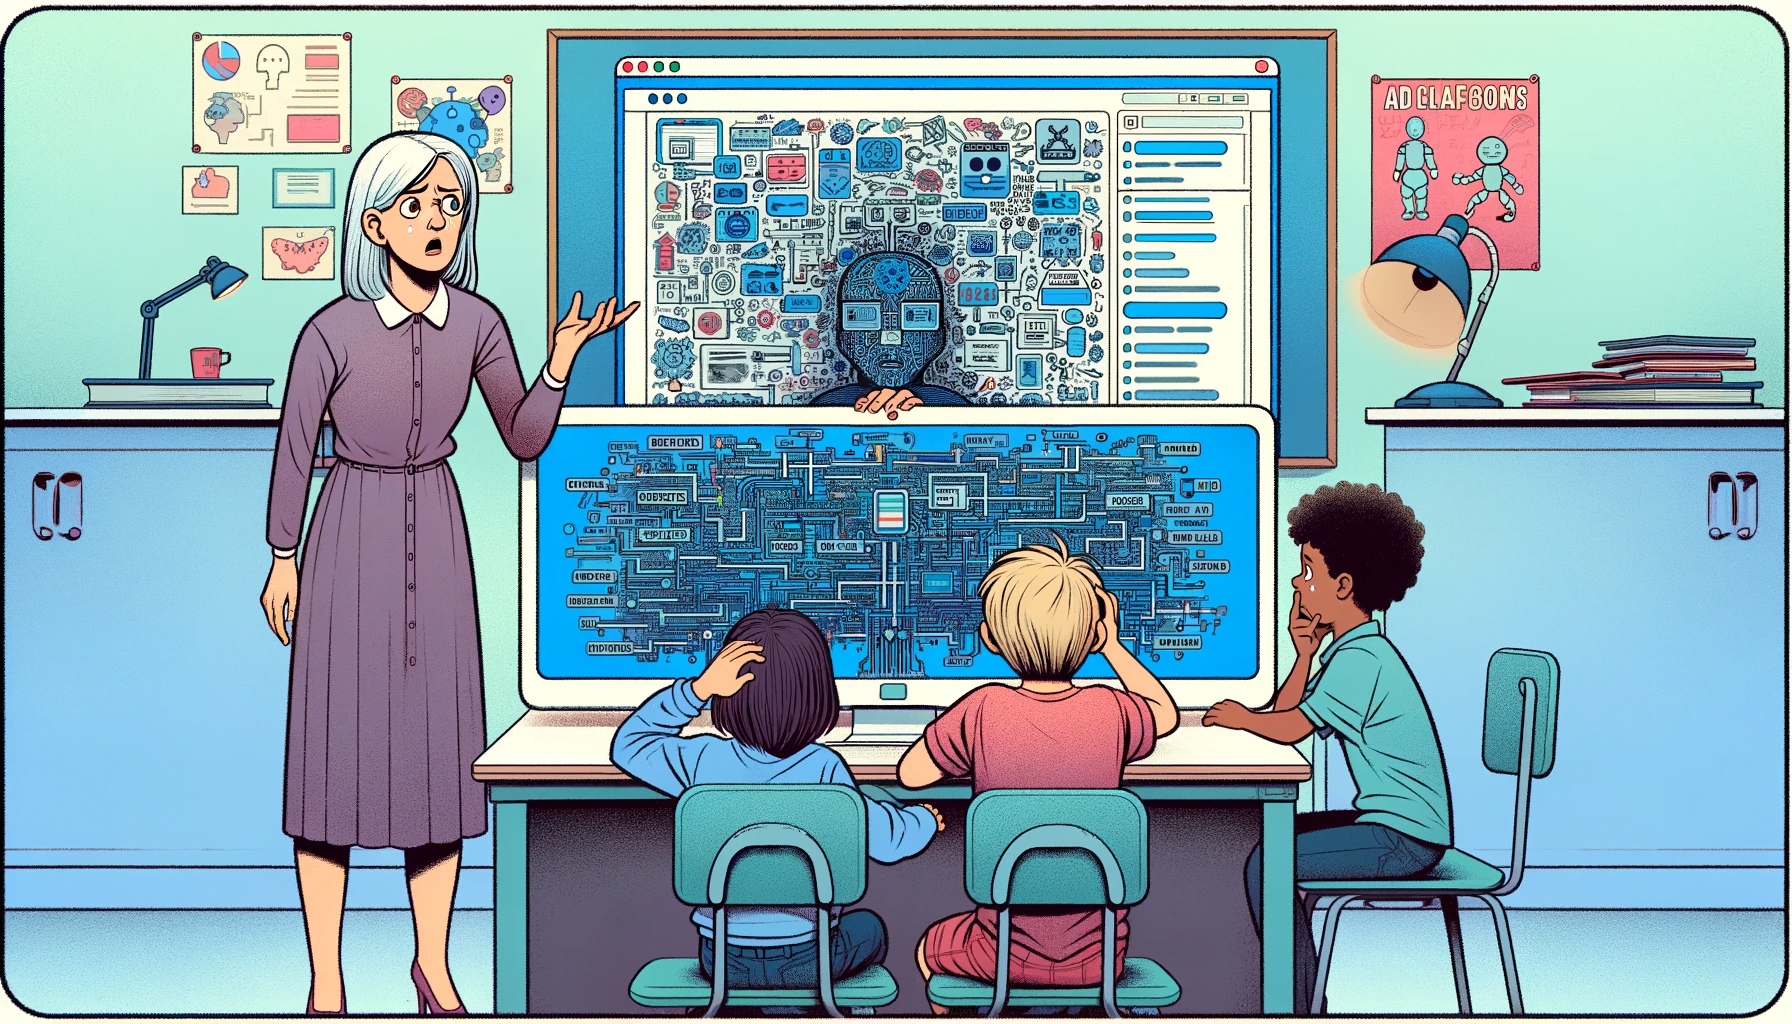  Teacher and students confused by a cluttered AI tool interface.